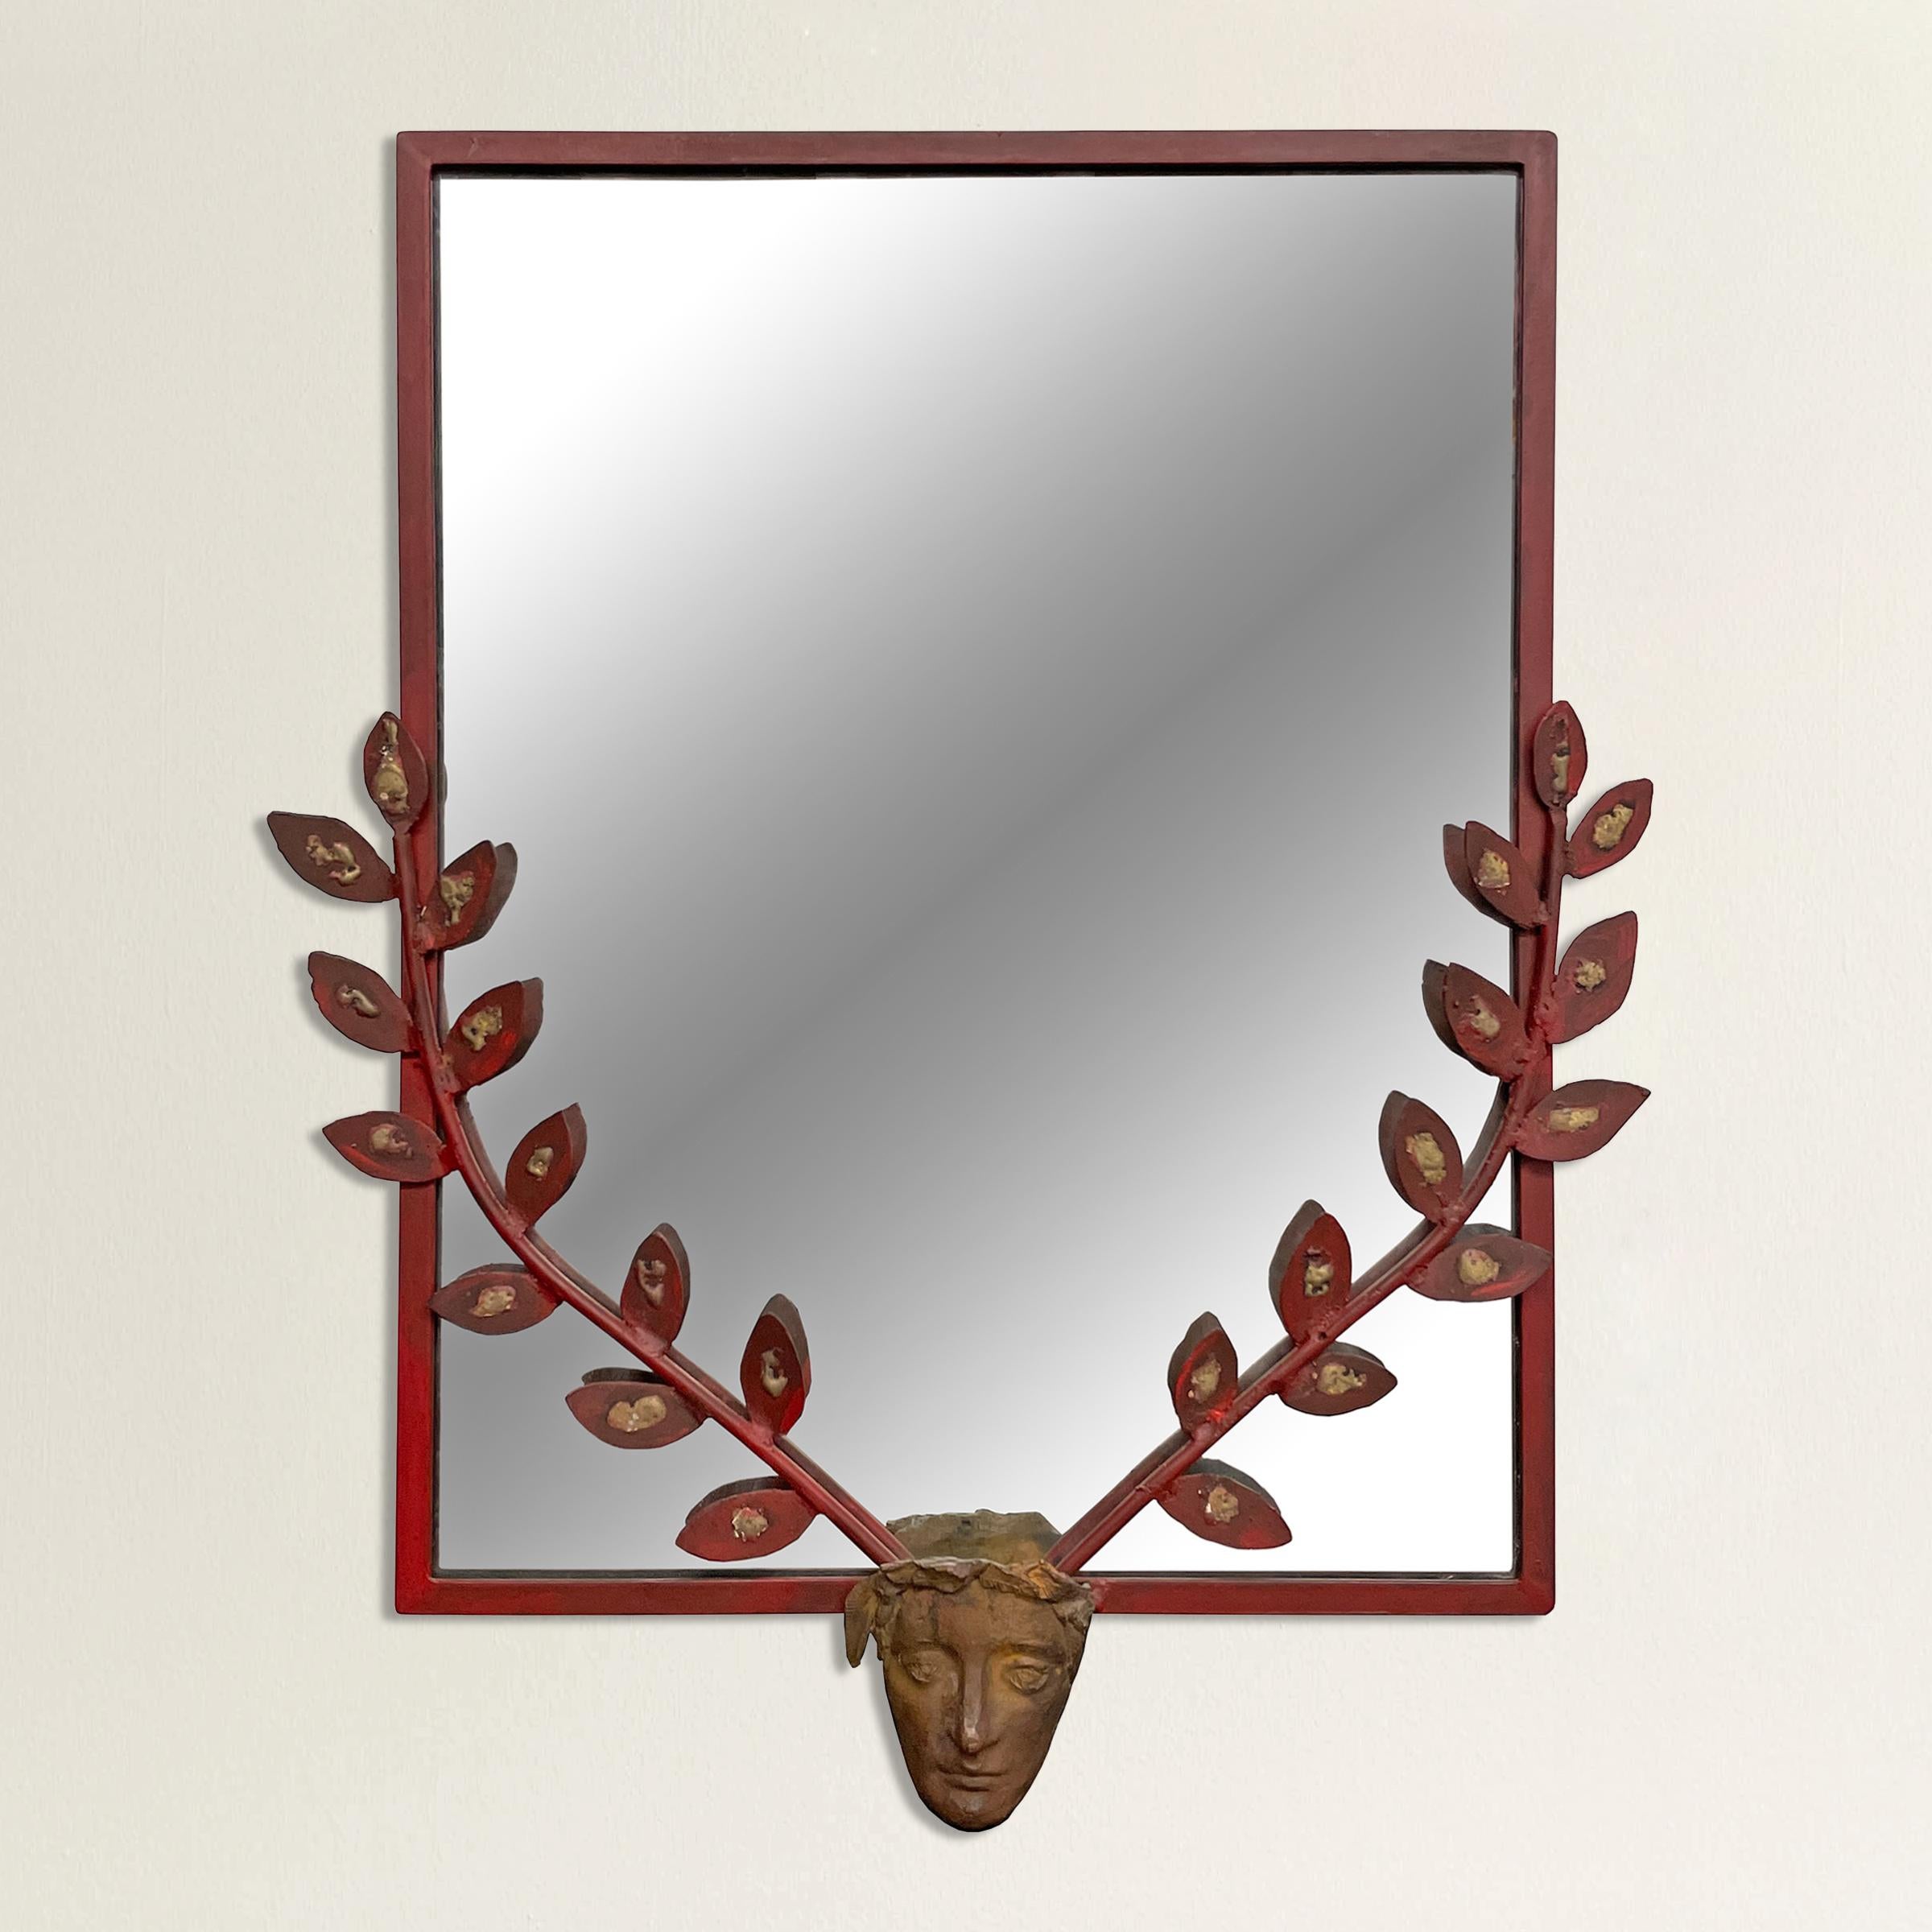 An incredible mid-20th century French red painted steel framed mirror with a cast bronze face with two laurel leaf branches, with a bronze drip in the center of each leaf.